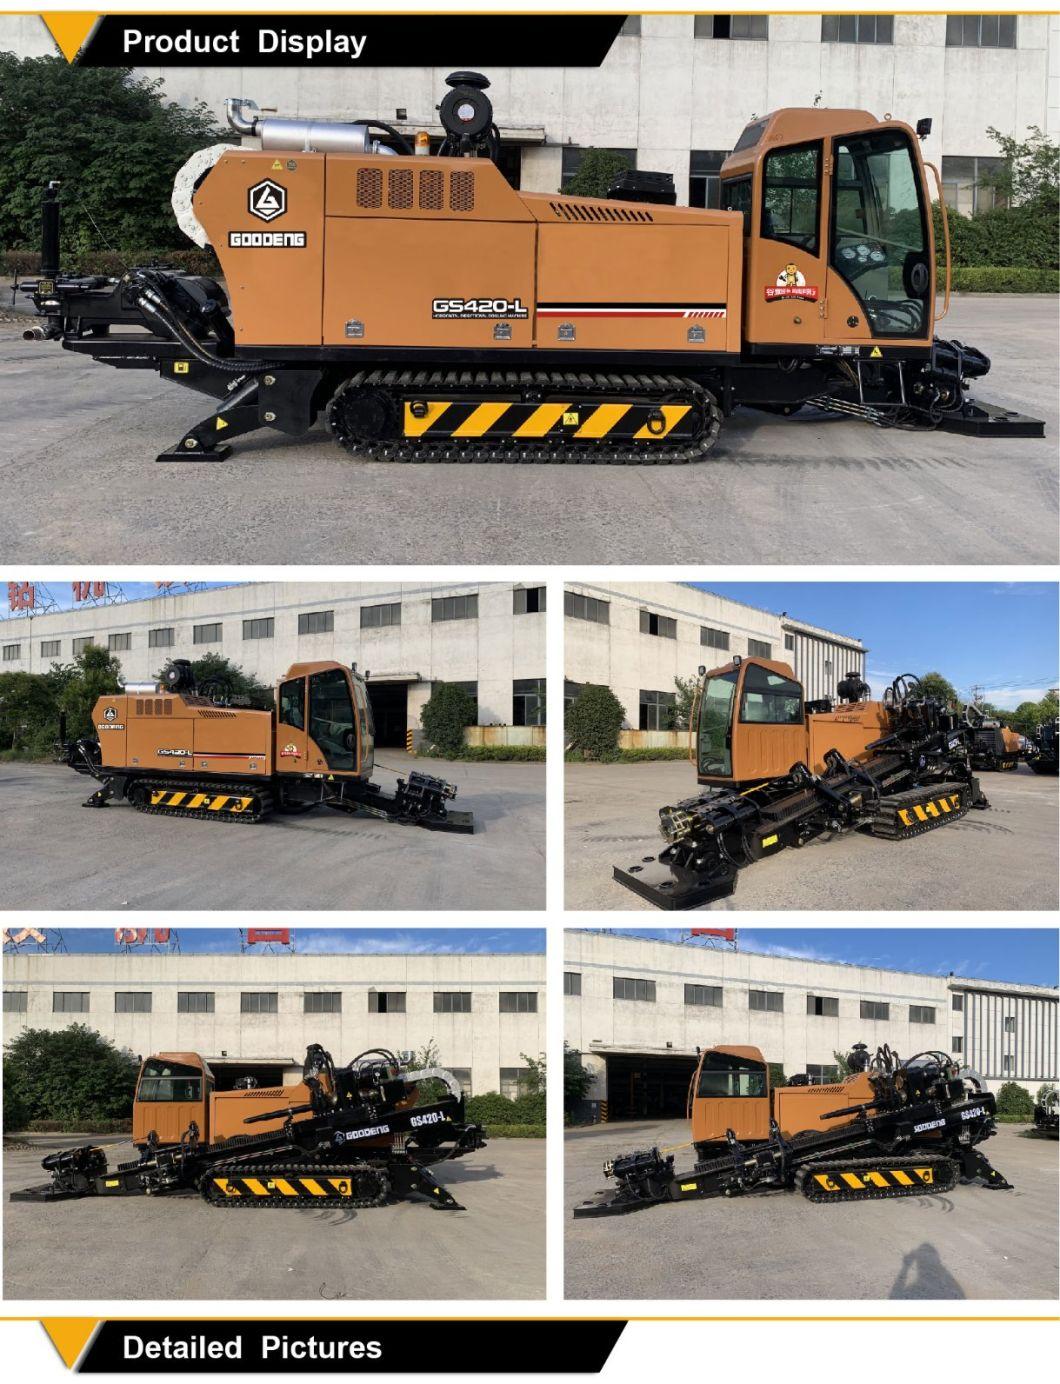 Hot sale GS420-LS HDD rig trenchless machine